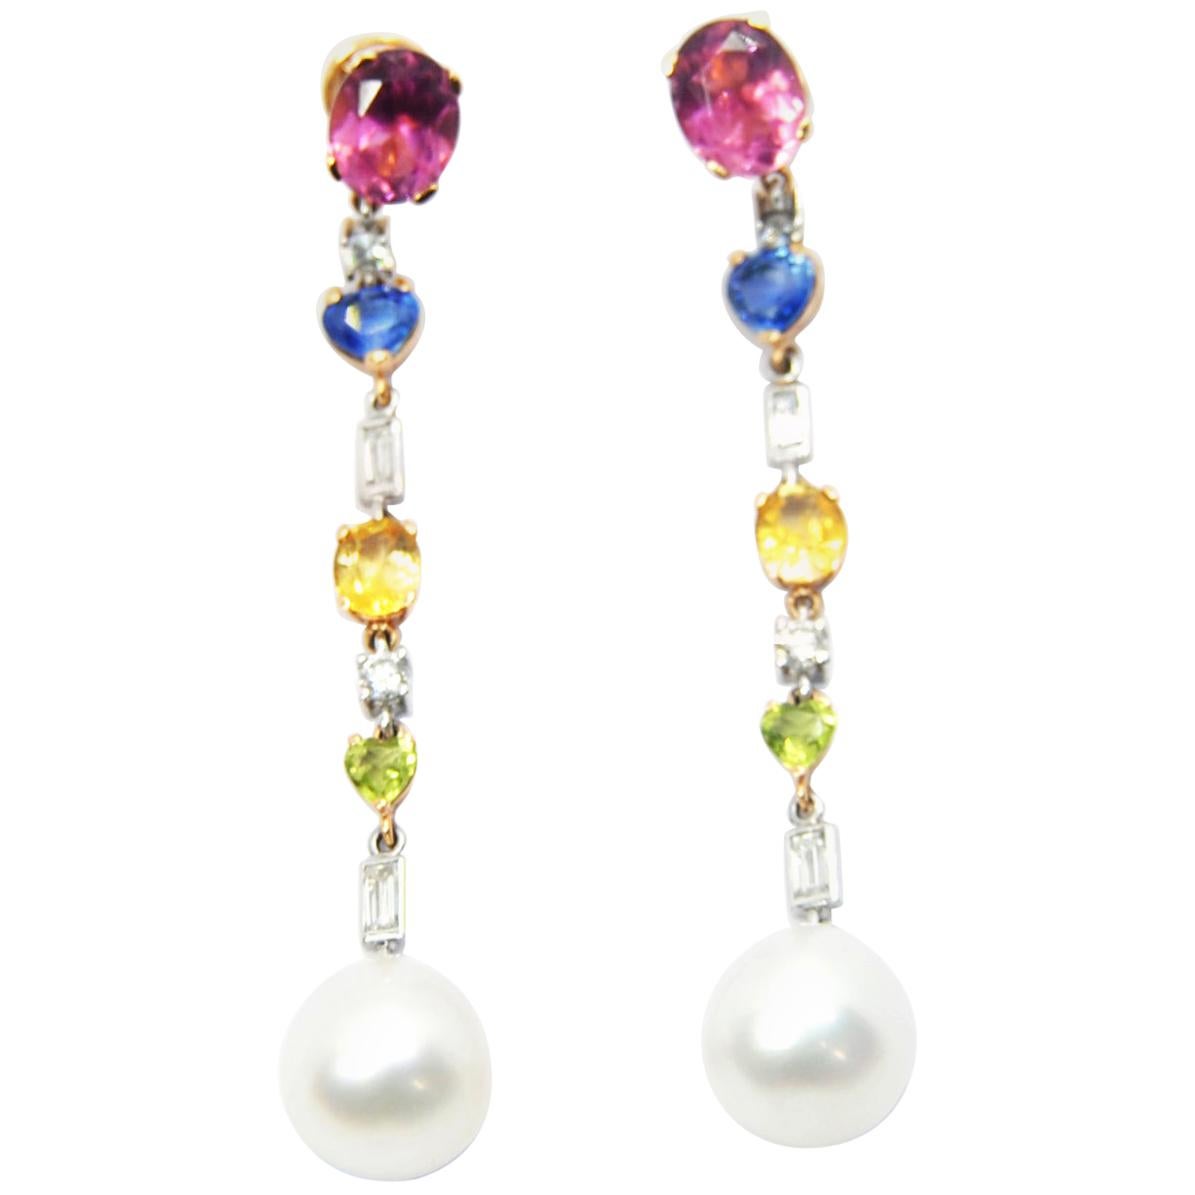 Chandelier Souths Sea Pearl Earrings in 18kt Gold Diamonds and Precious Gems